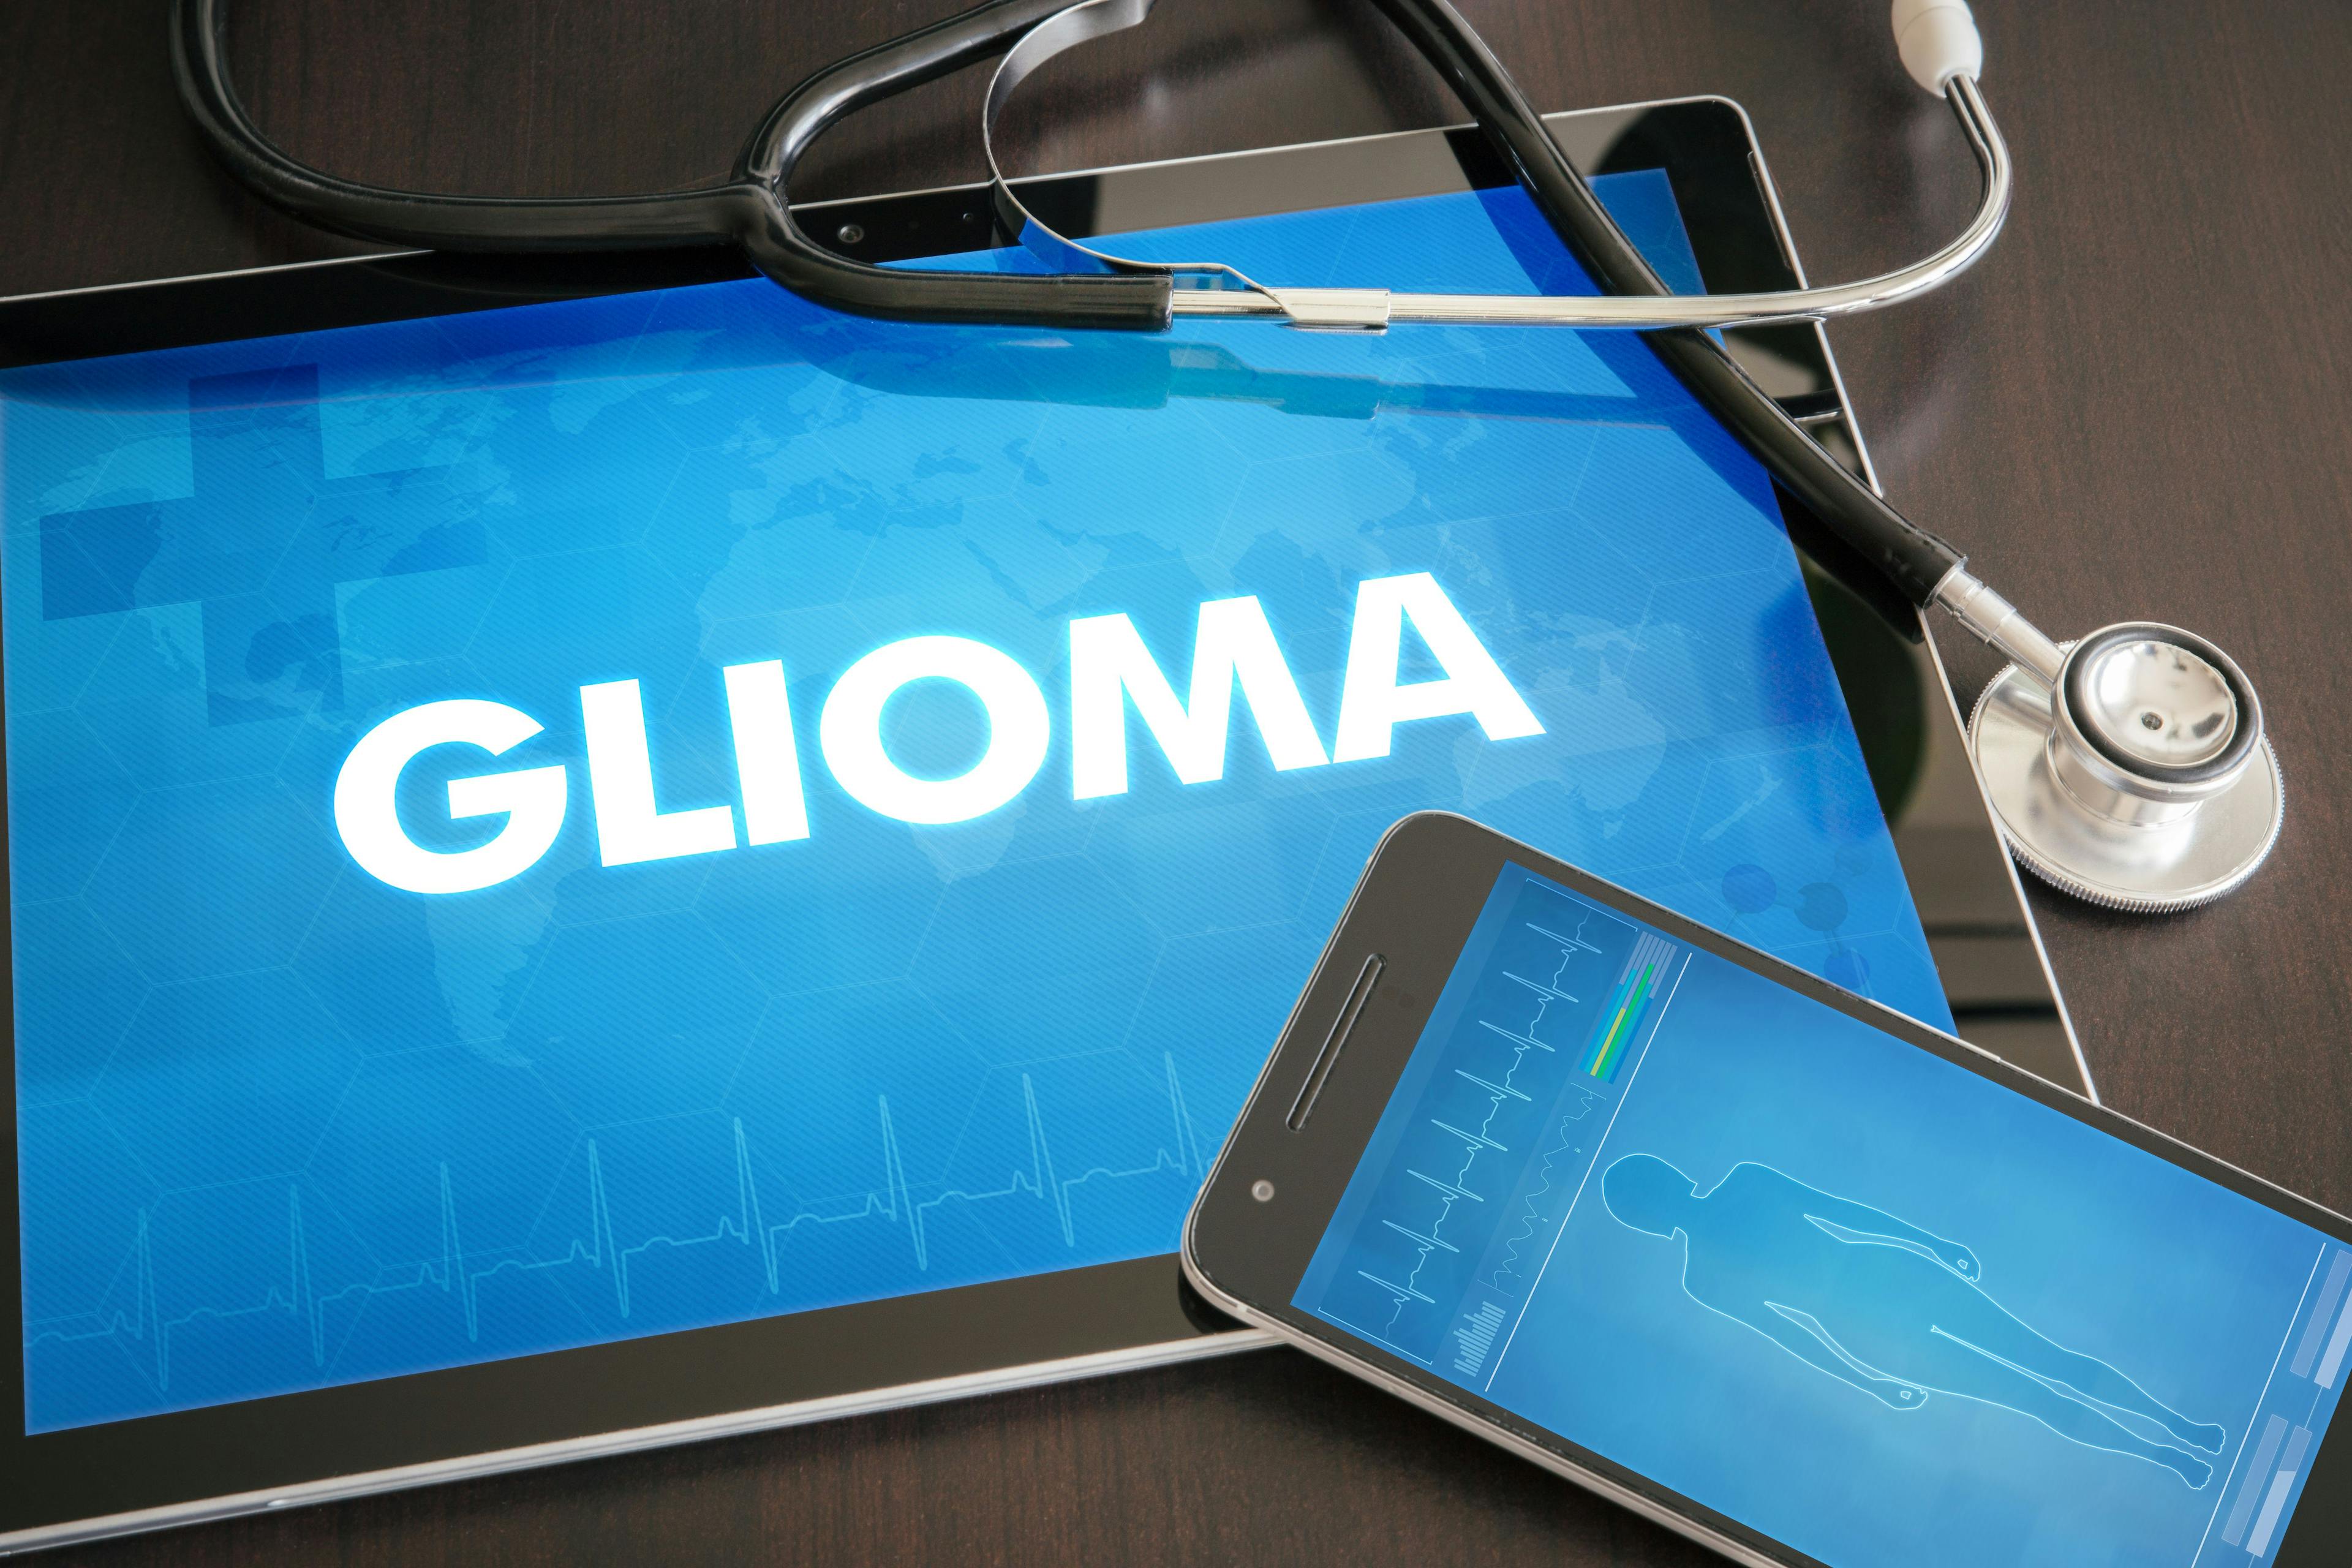 Glioma (cancer type) diagnosis medical concept on tablet screen with stethoscope